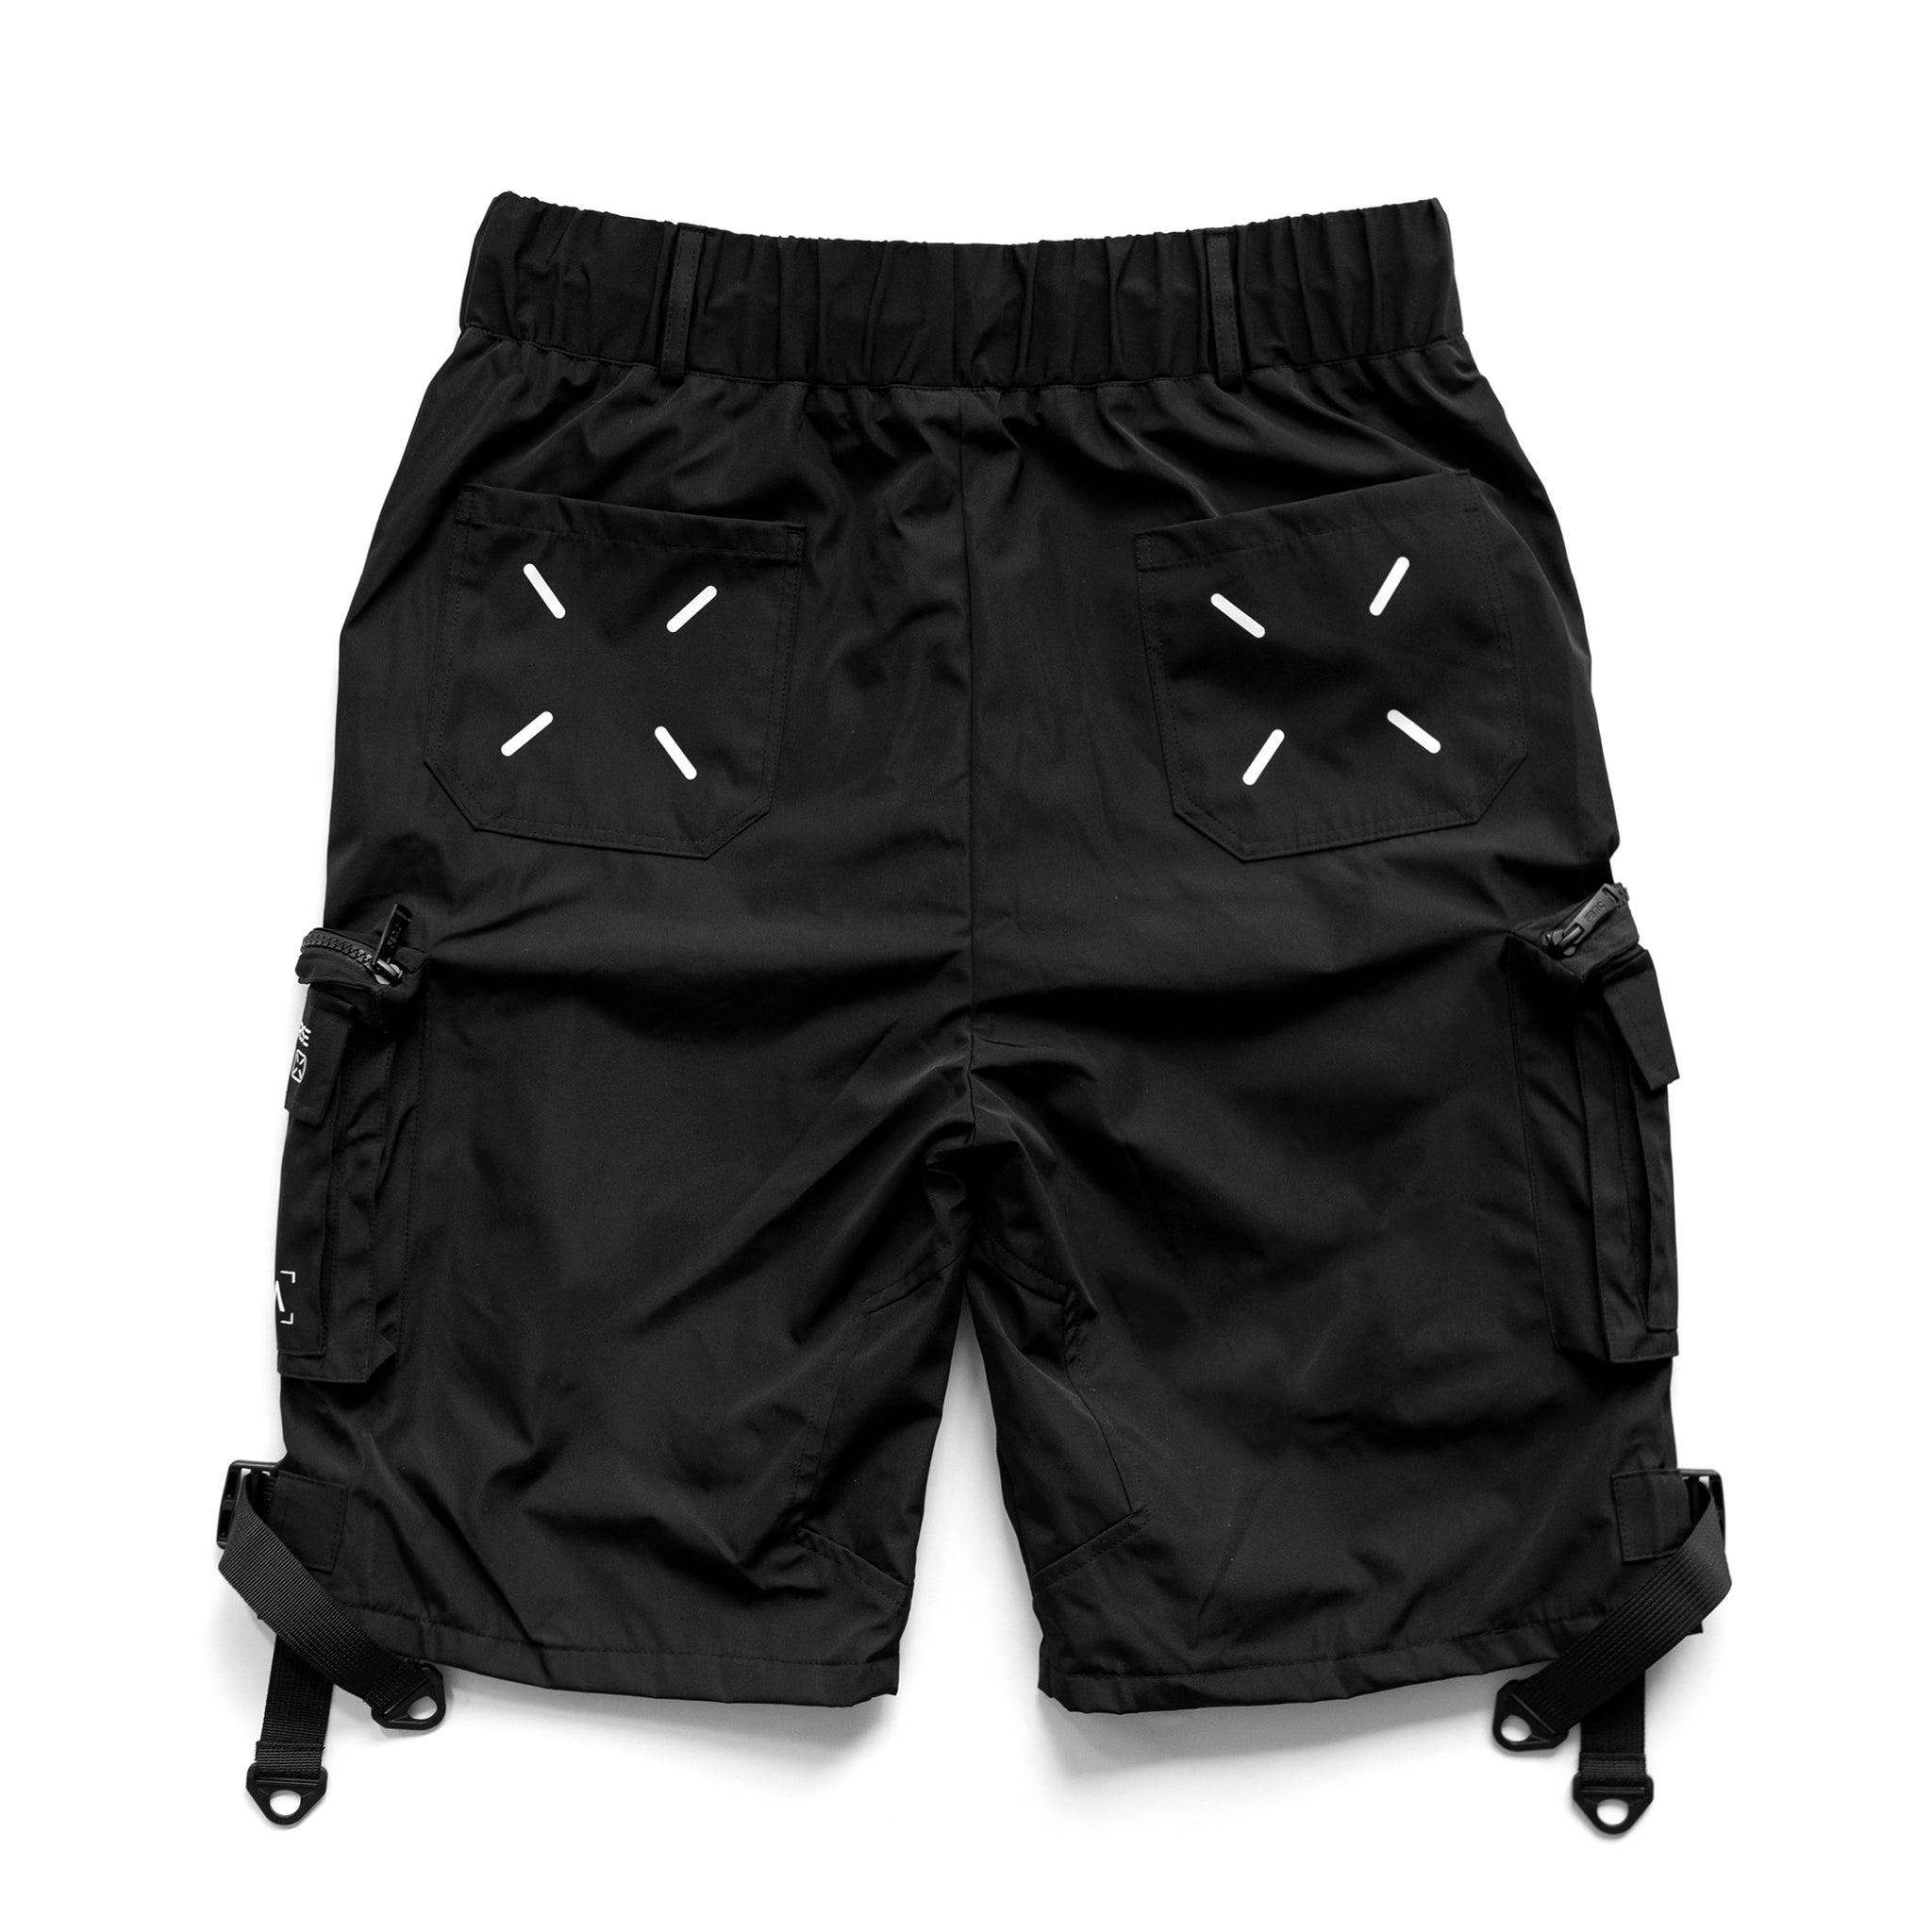 CGS-Type 35A Black Cargo Shorts - Fabric of the Universe